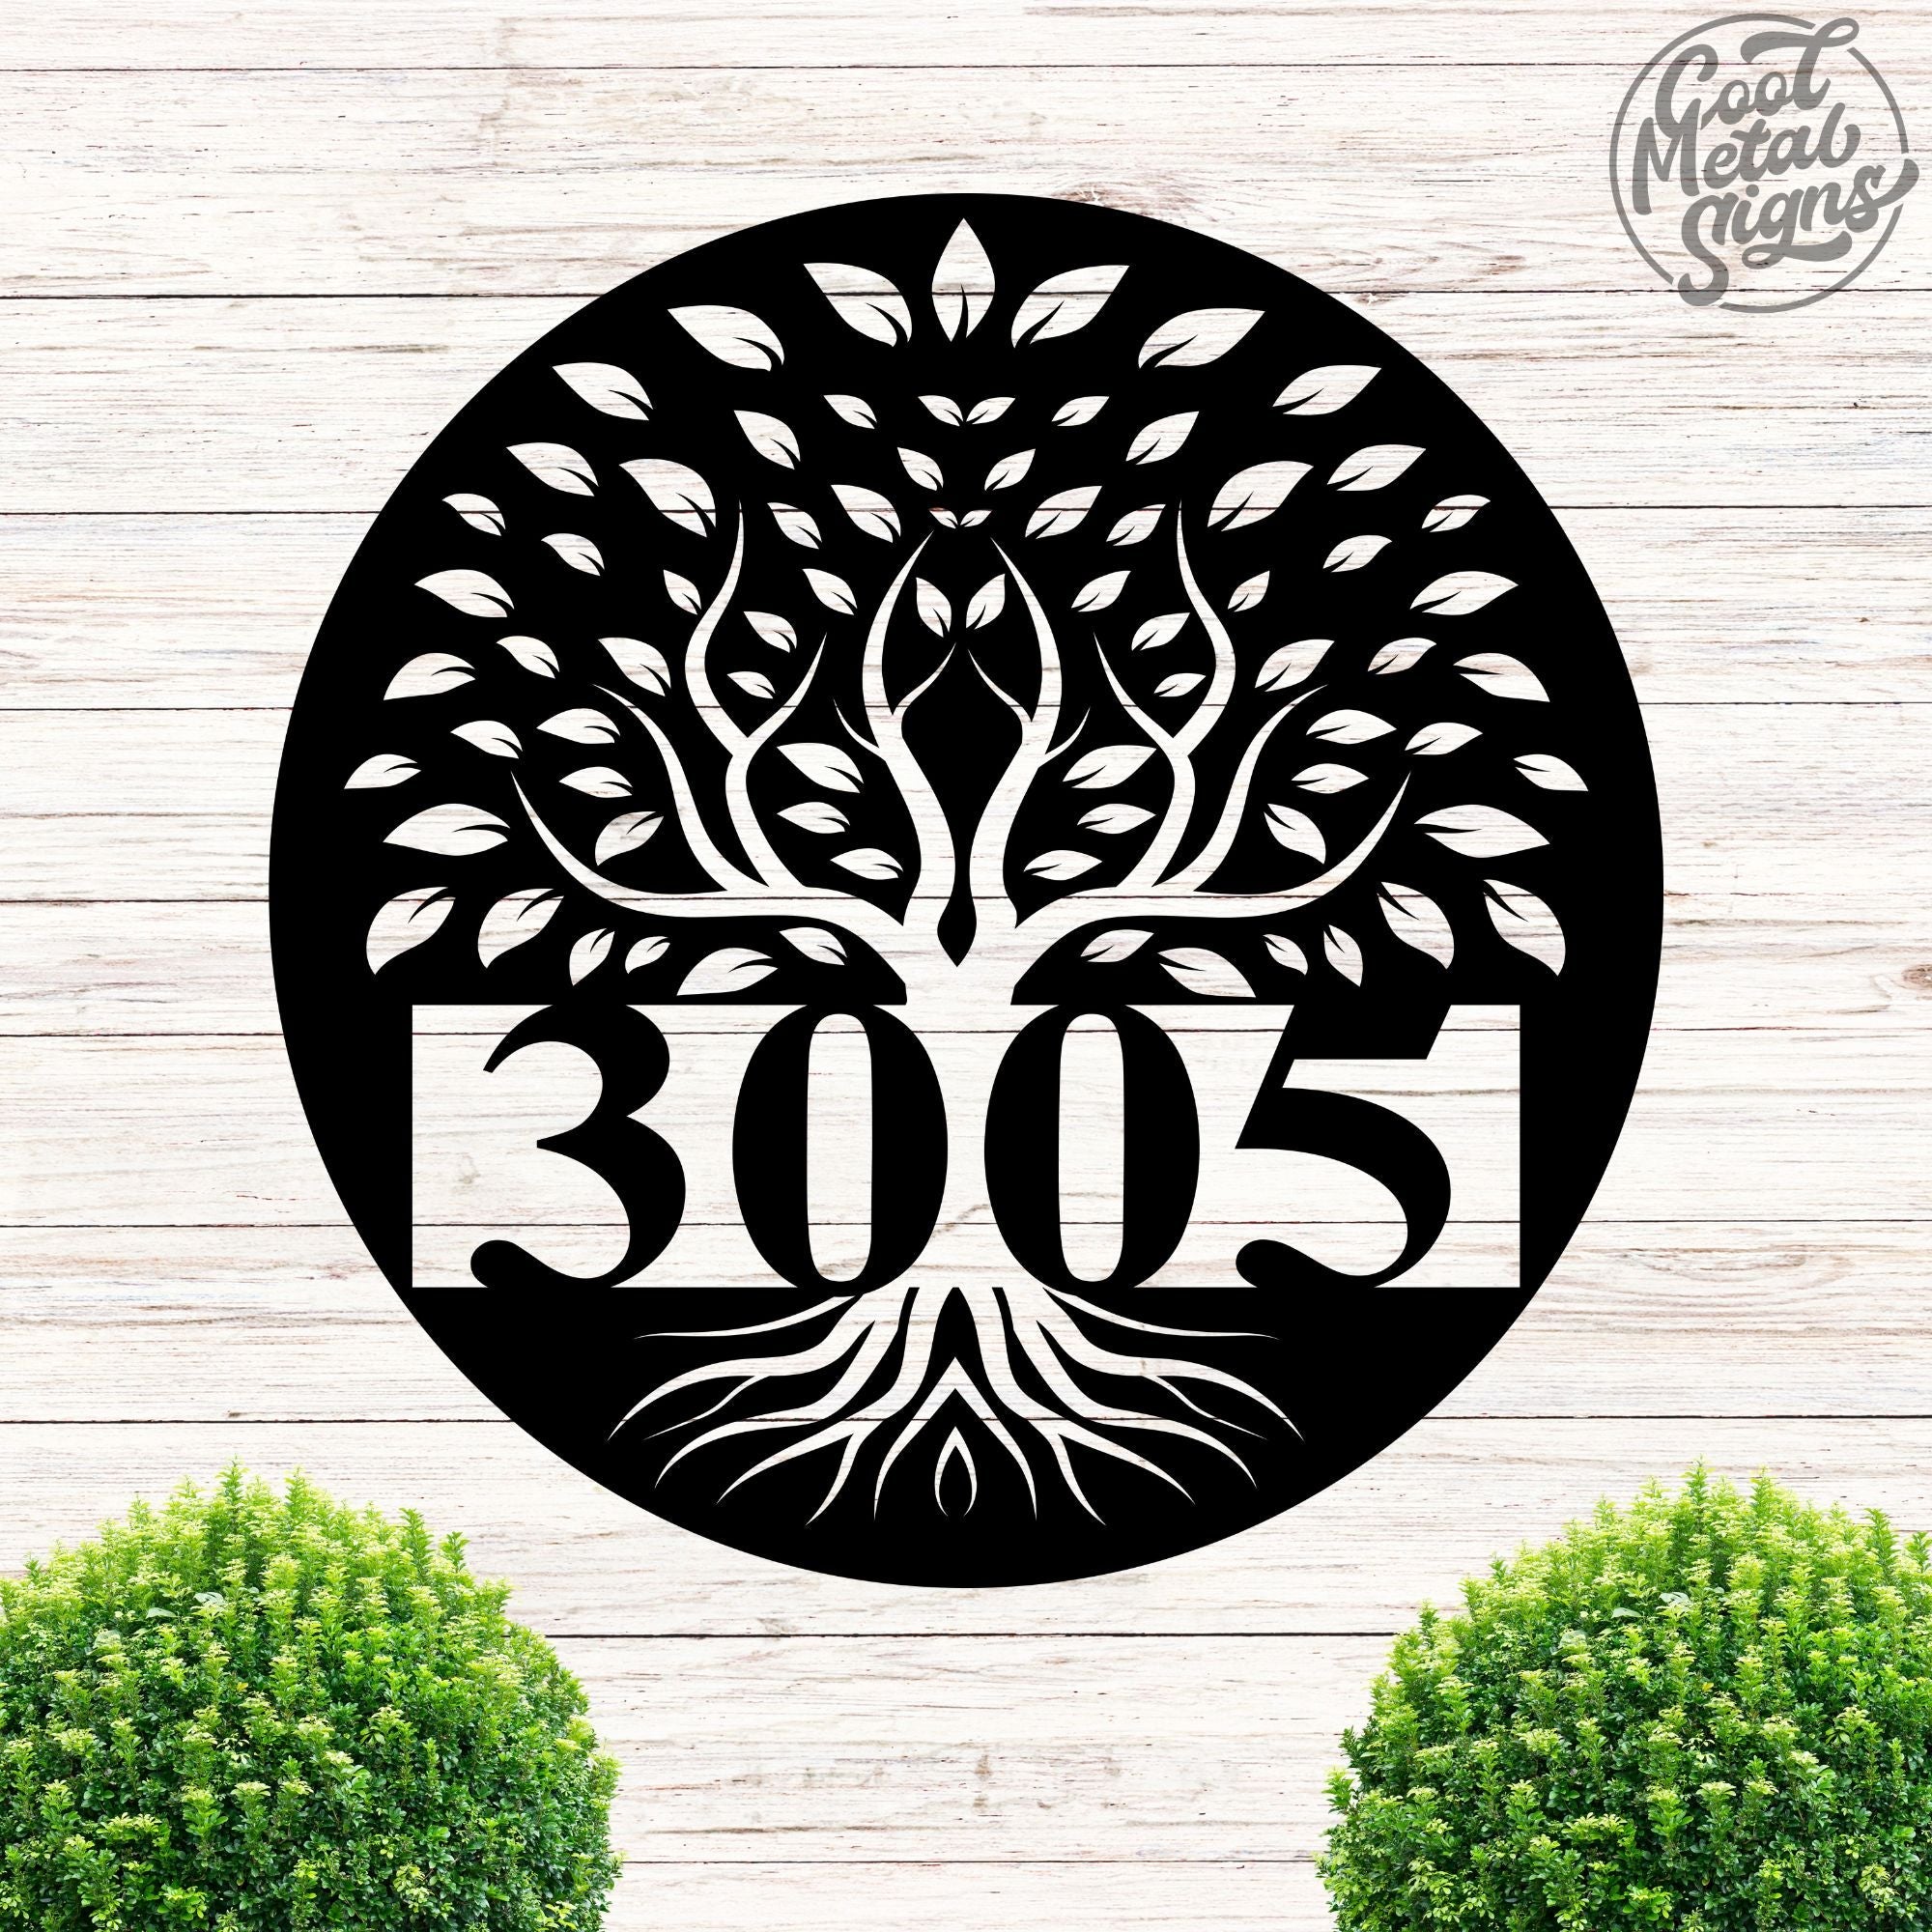 Personalized Tree Address Sign - Cool Metal Signs